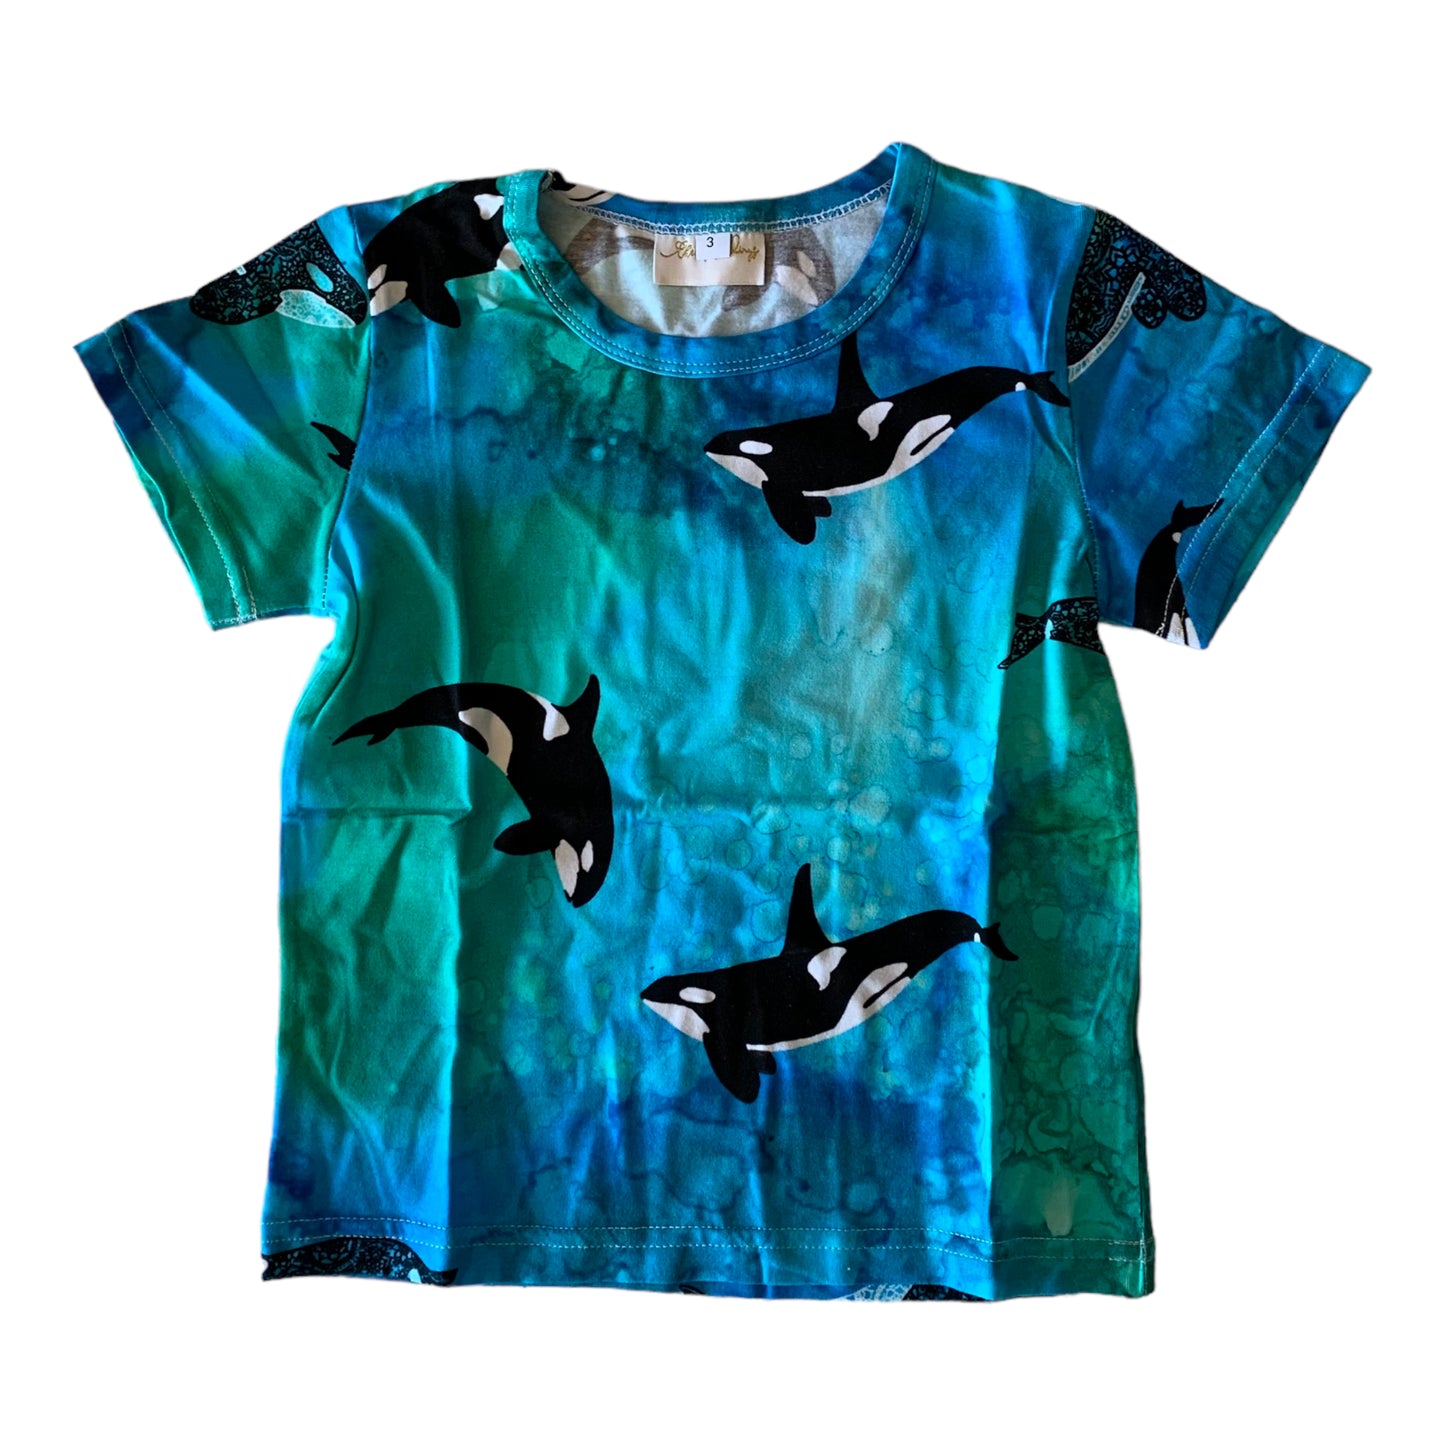 T shirt - Orcas of the Gulf